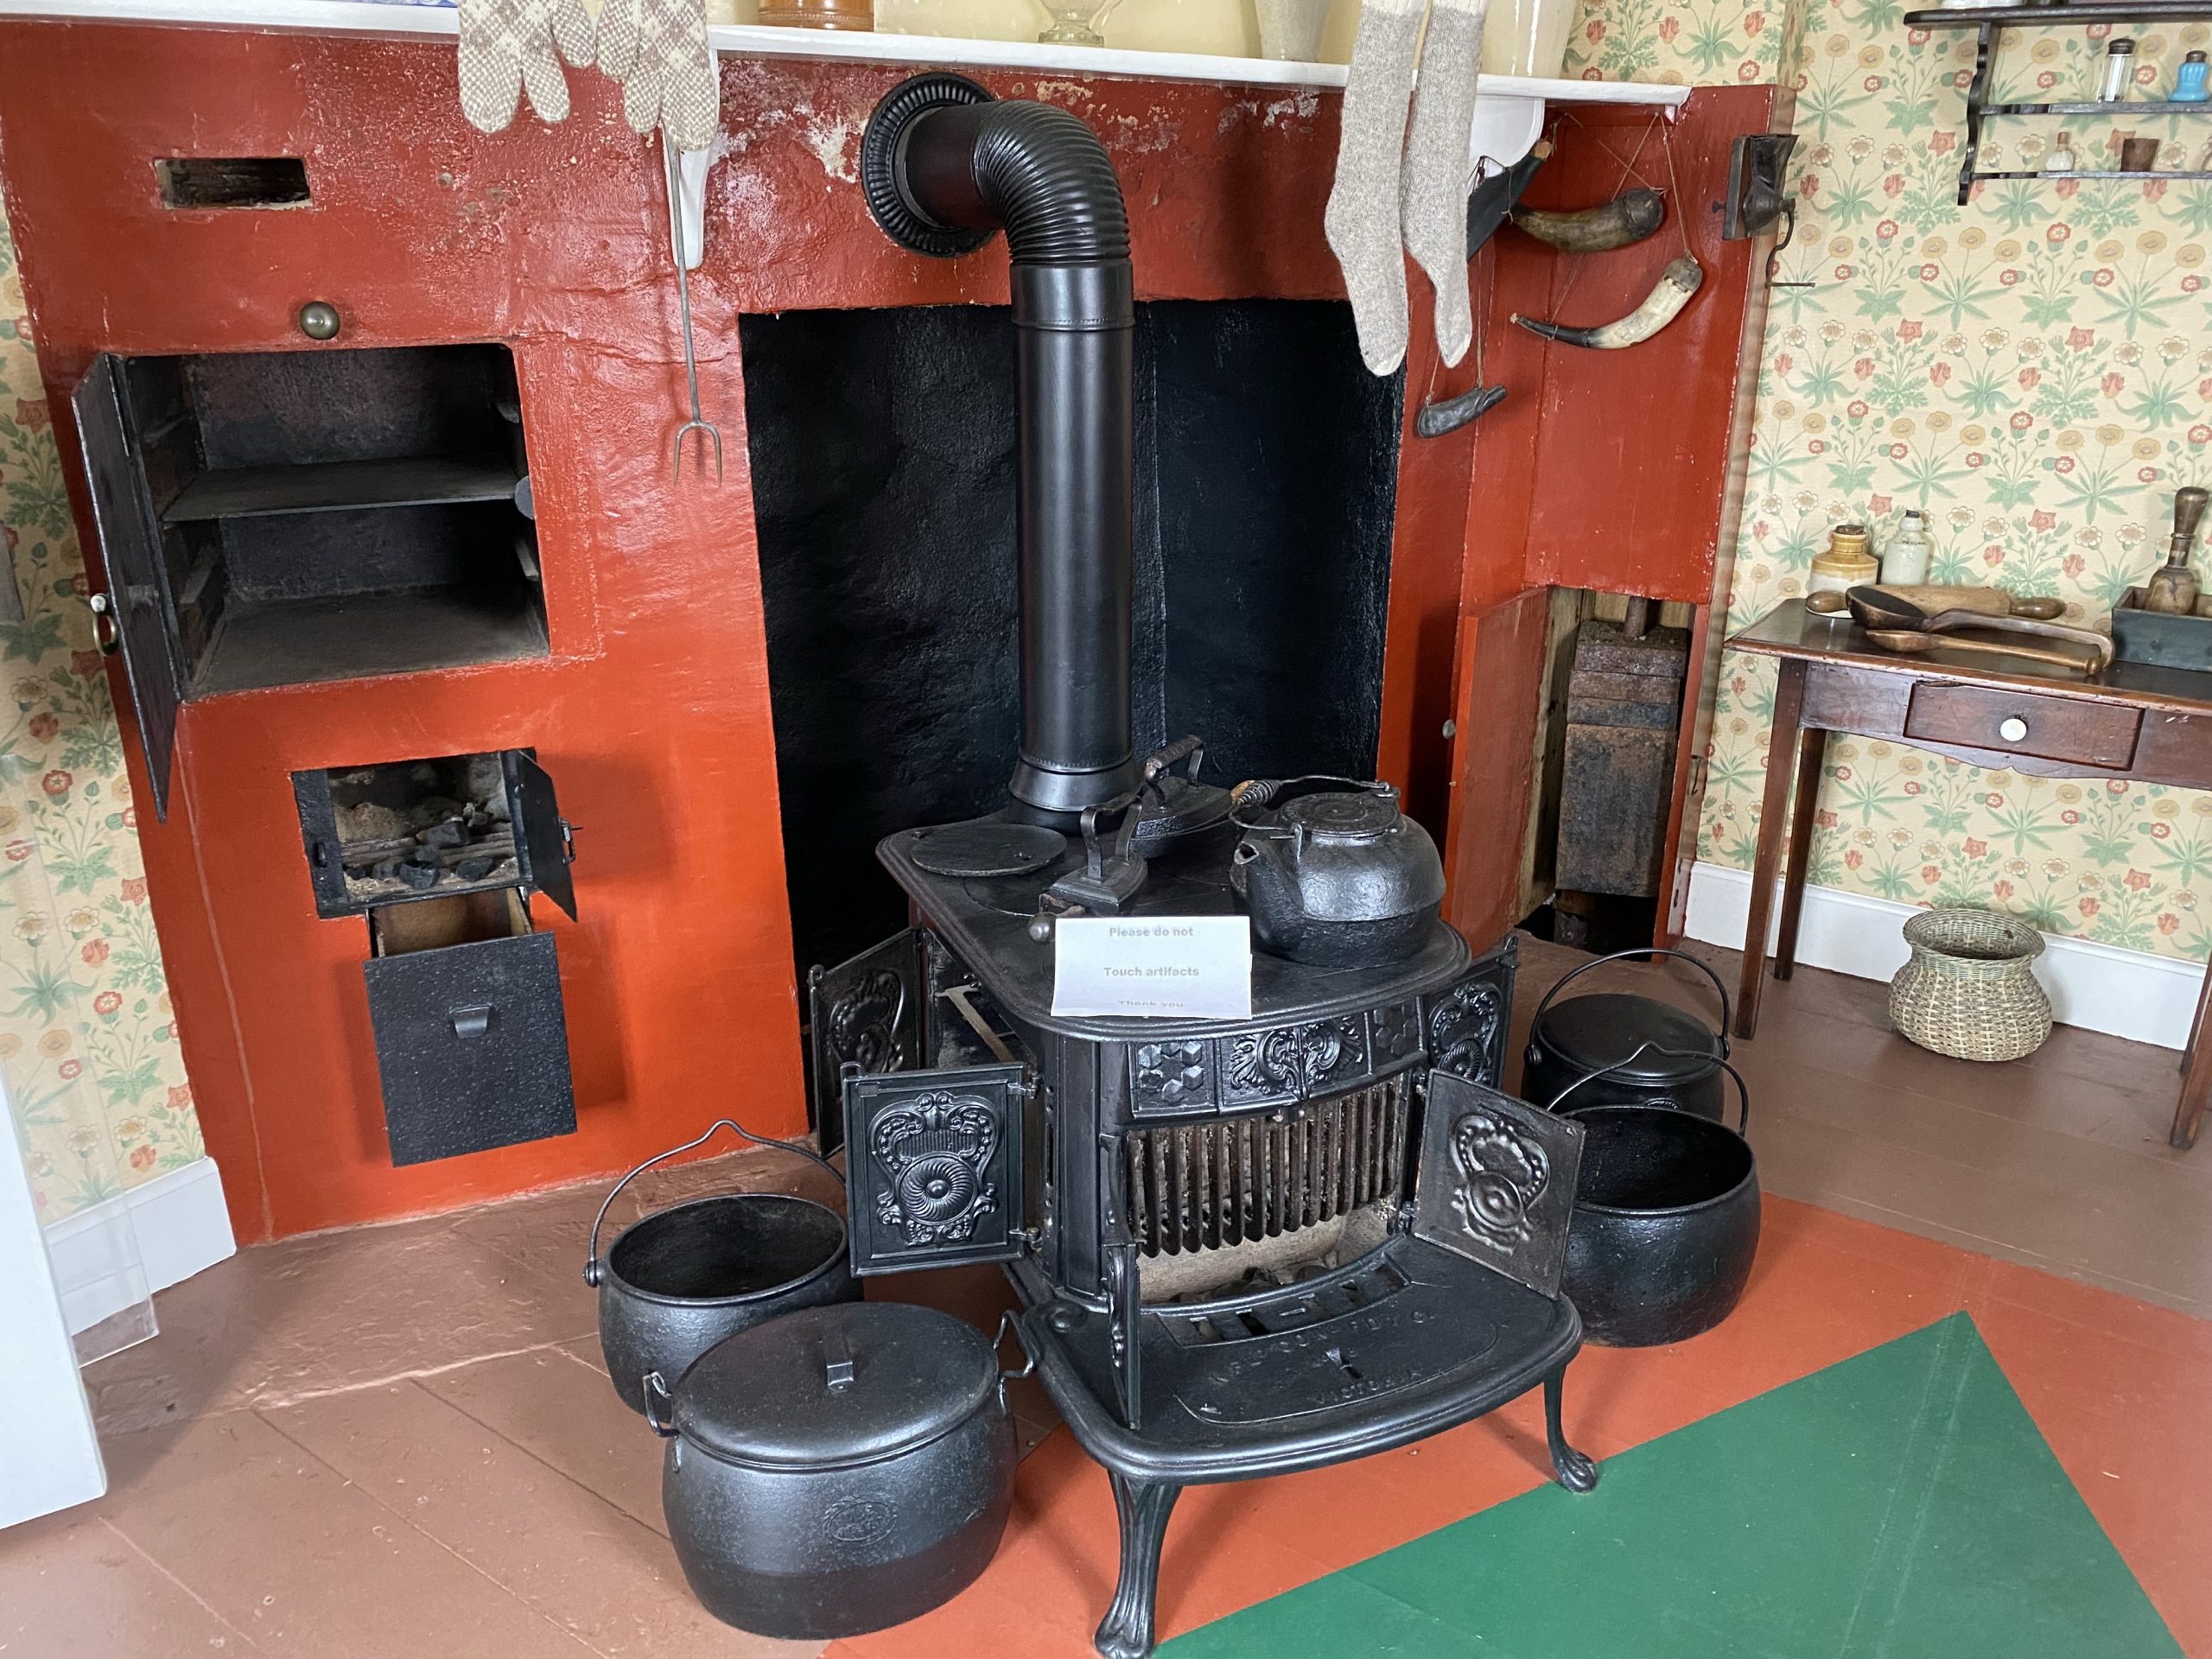 The cooking/heating stove and hearth in the Bonavista lighthouse; you can see the lighthouse counterweight in the open right side door.